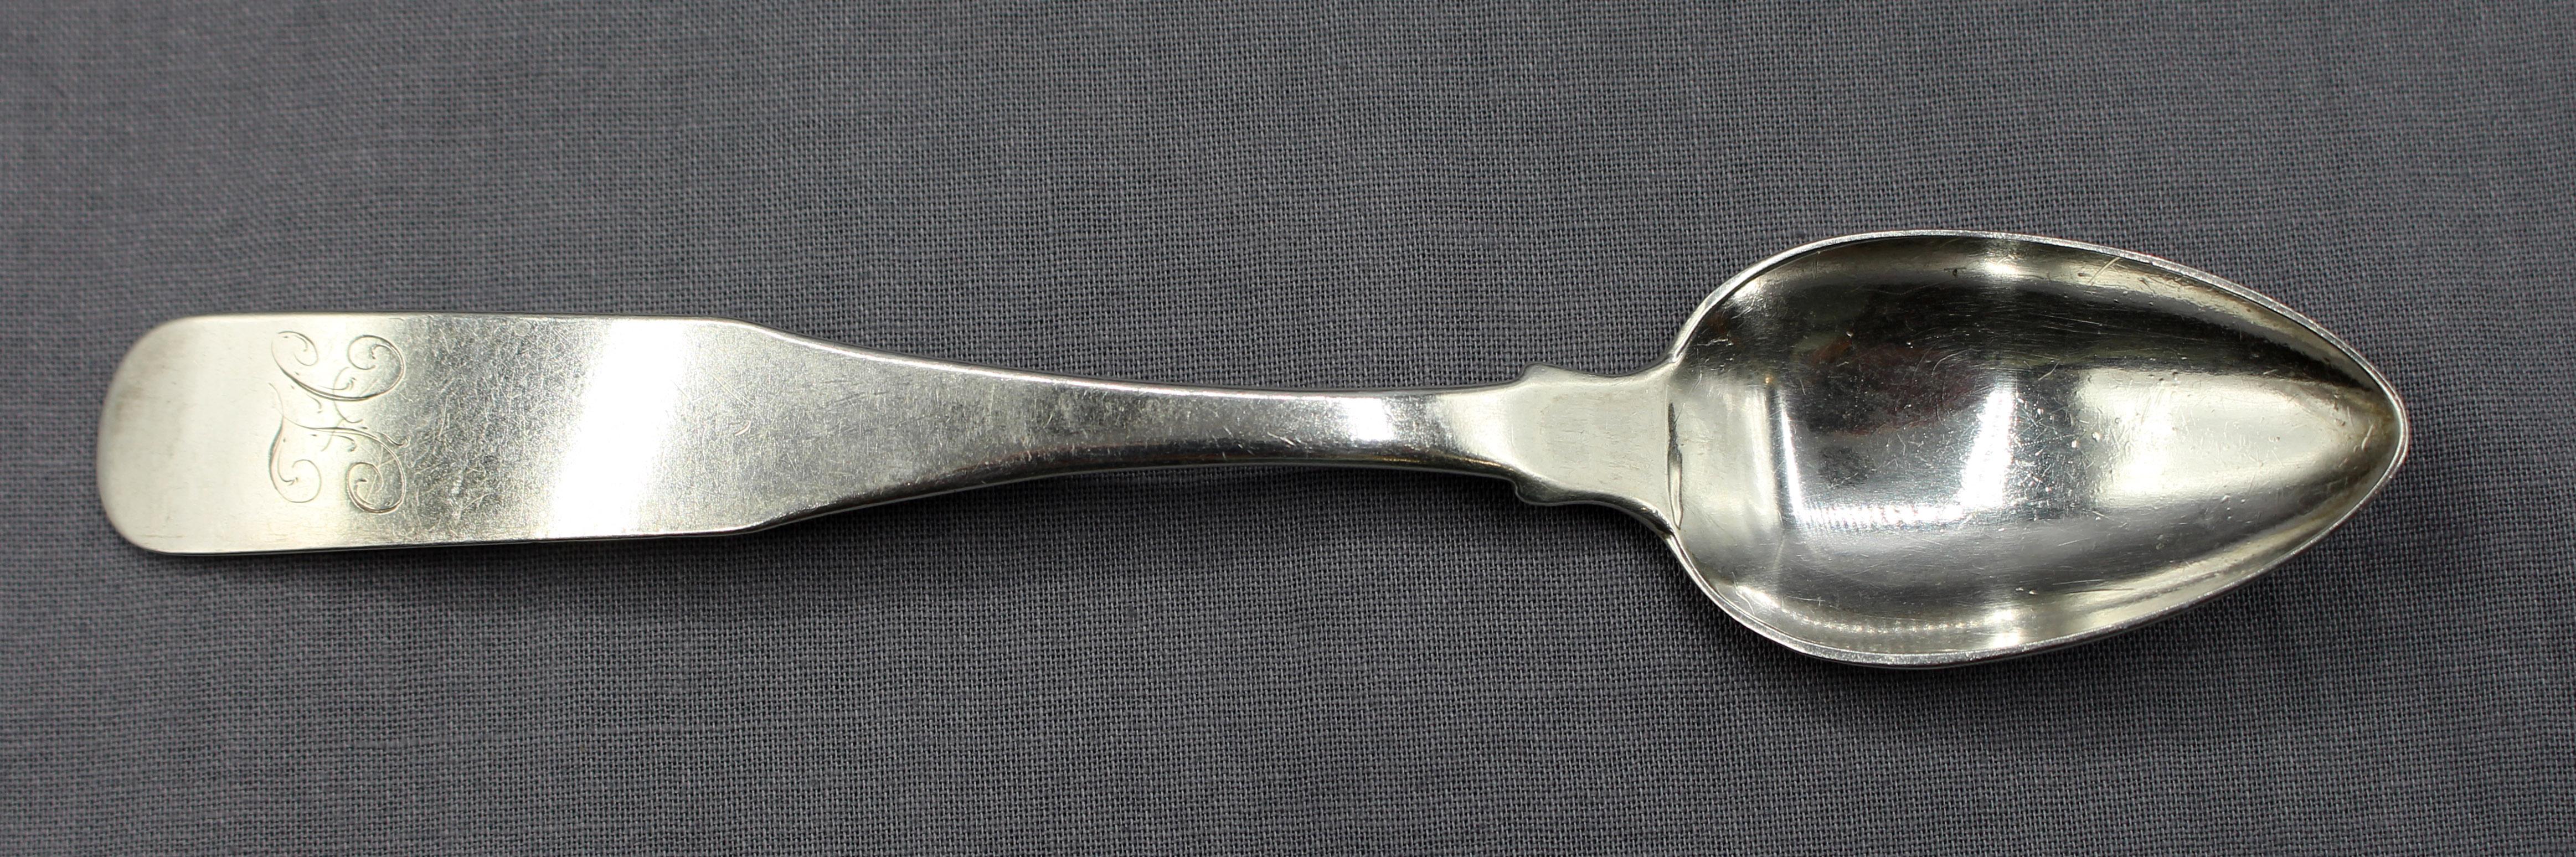 Set of 12 Baltimore 1816 coin silver teaspoons by John Erwin. A rare & fine set with the assy mark of that year to a purity of 91.66% (sterling is 92.5%). Elongated, graceful handles with chamfered, pointed shoulders. Monogram 